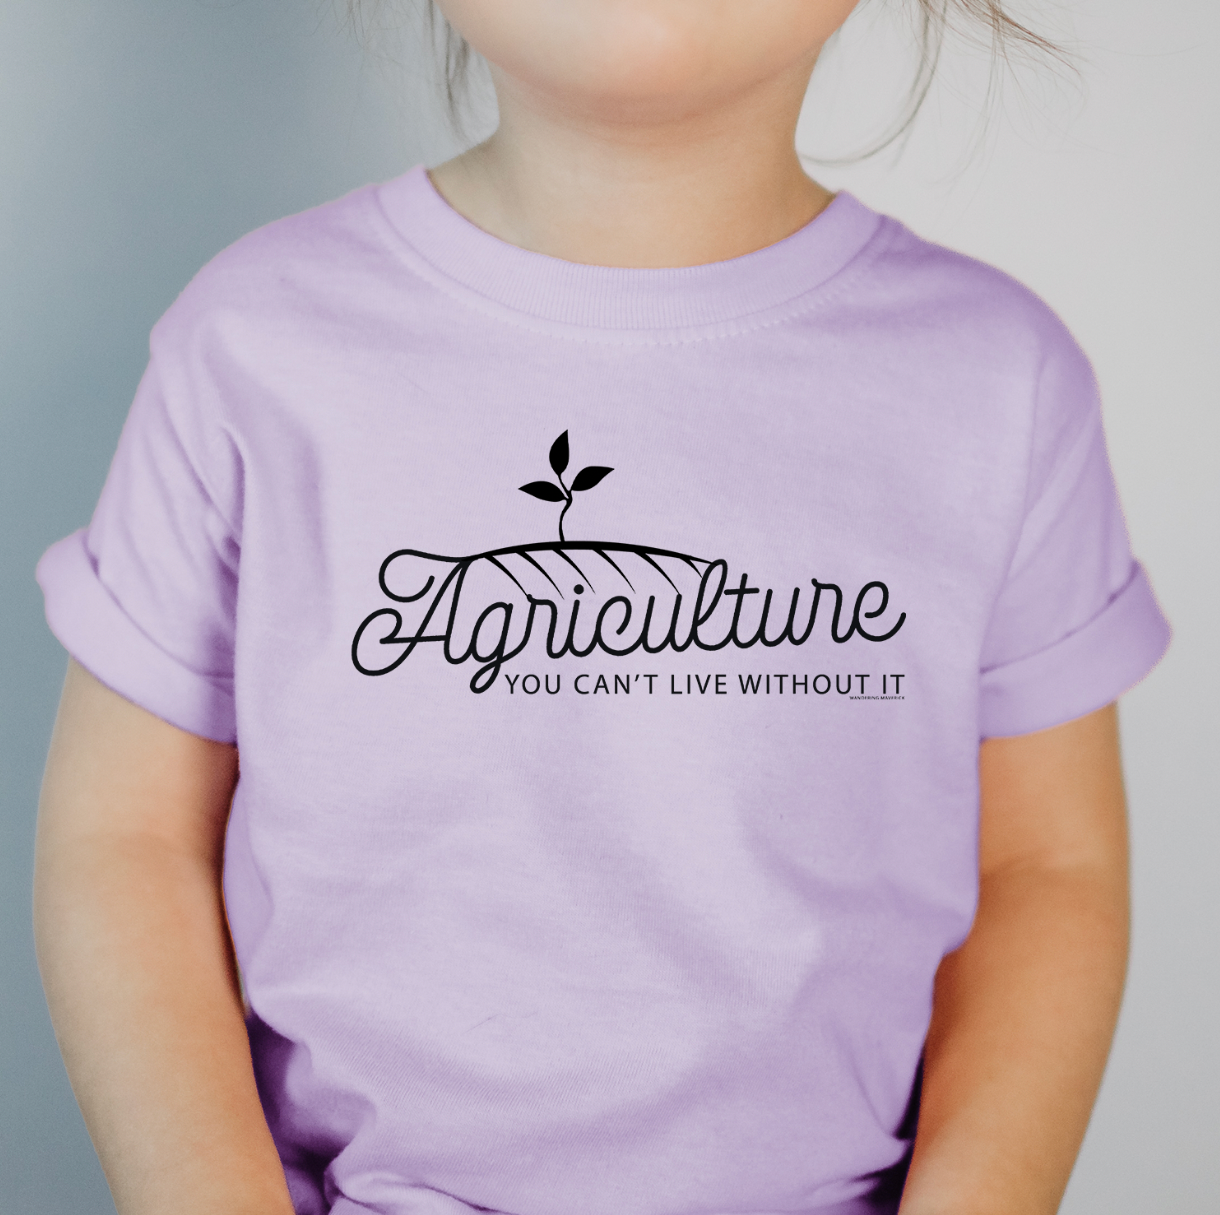 Agriculture You Can't Live Without It One Piece/T-Shirt (Newborn - Youth XL) - Multiple Colors!